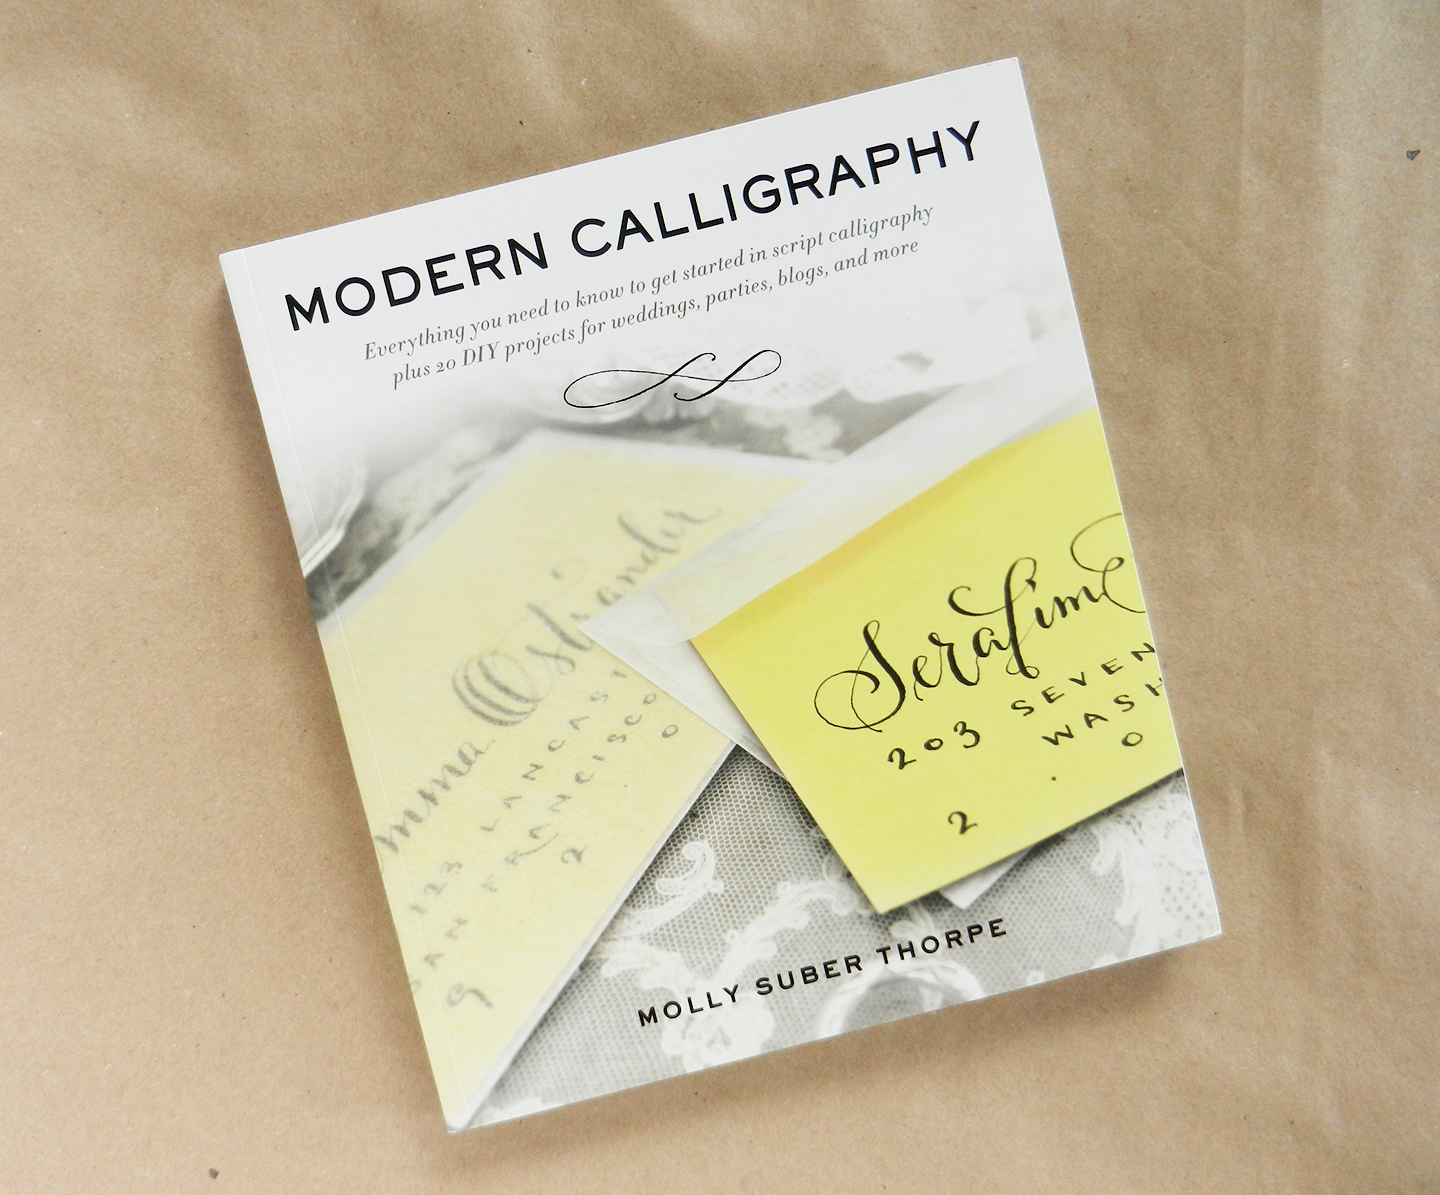 Modern Calligraphy by Molly Suber Thorpe: Book Review